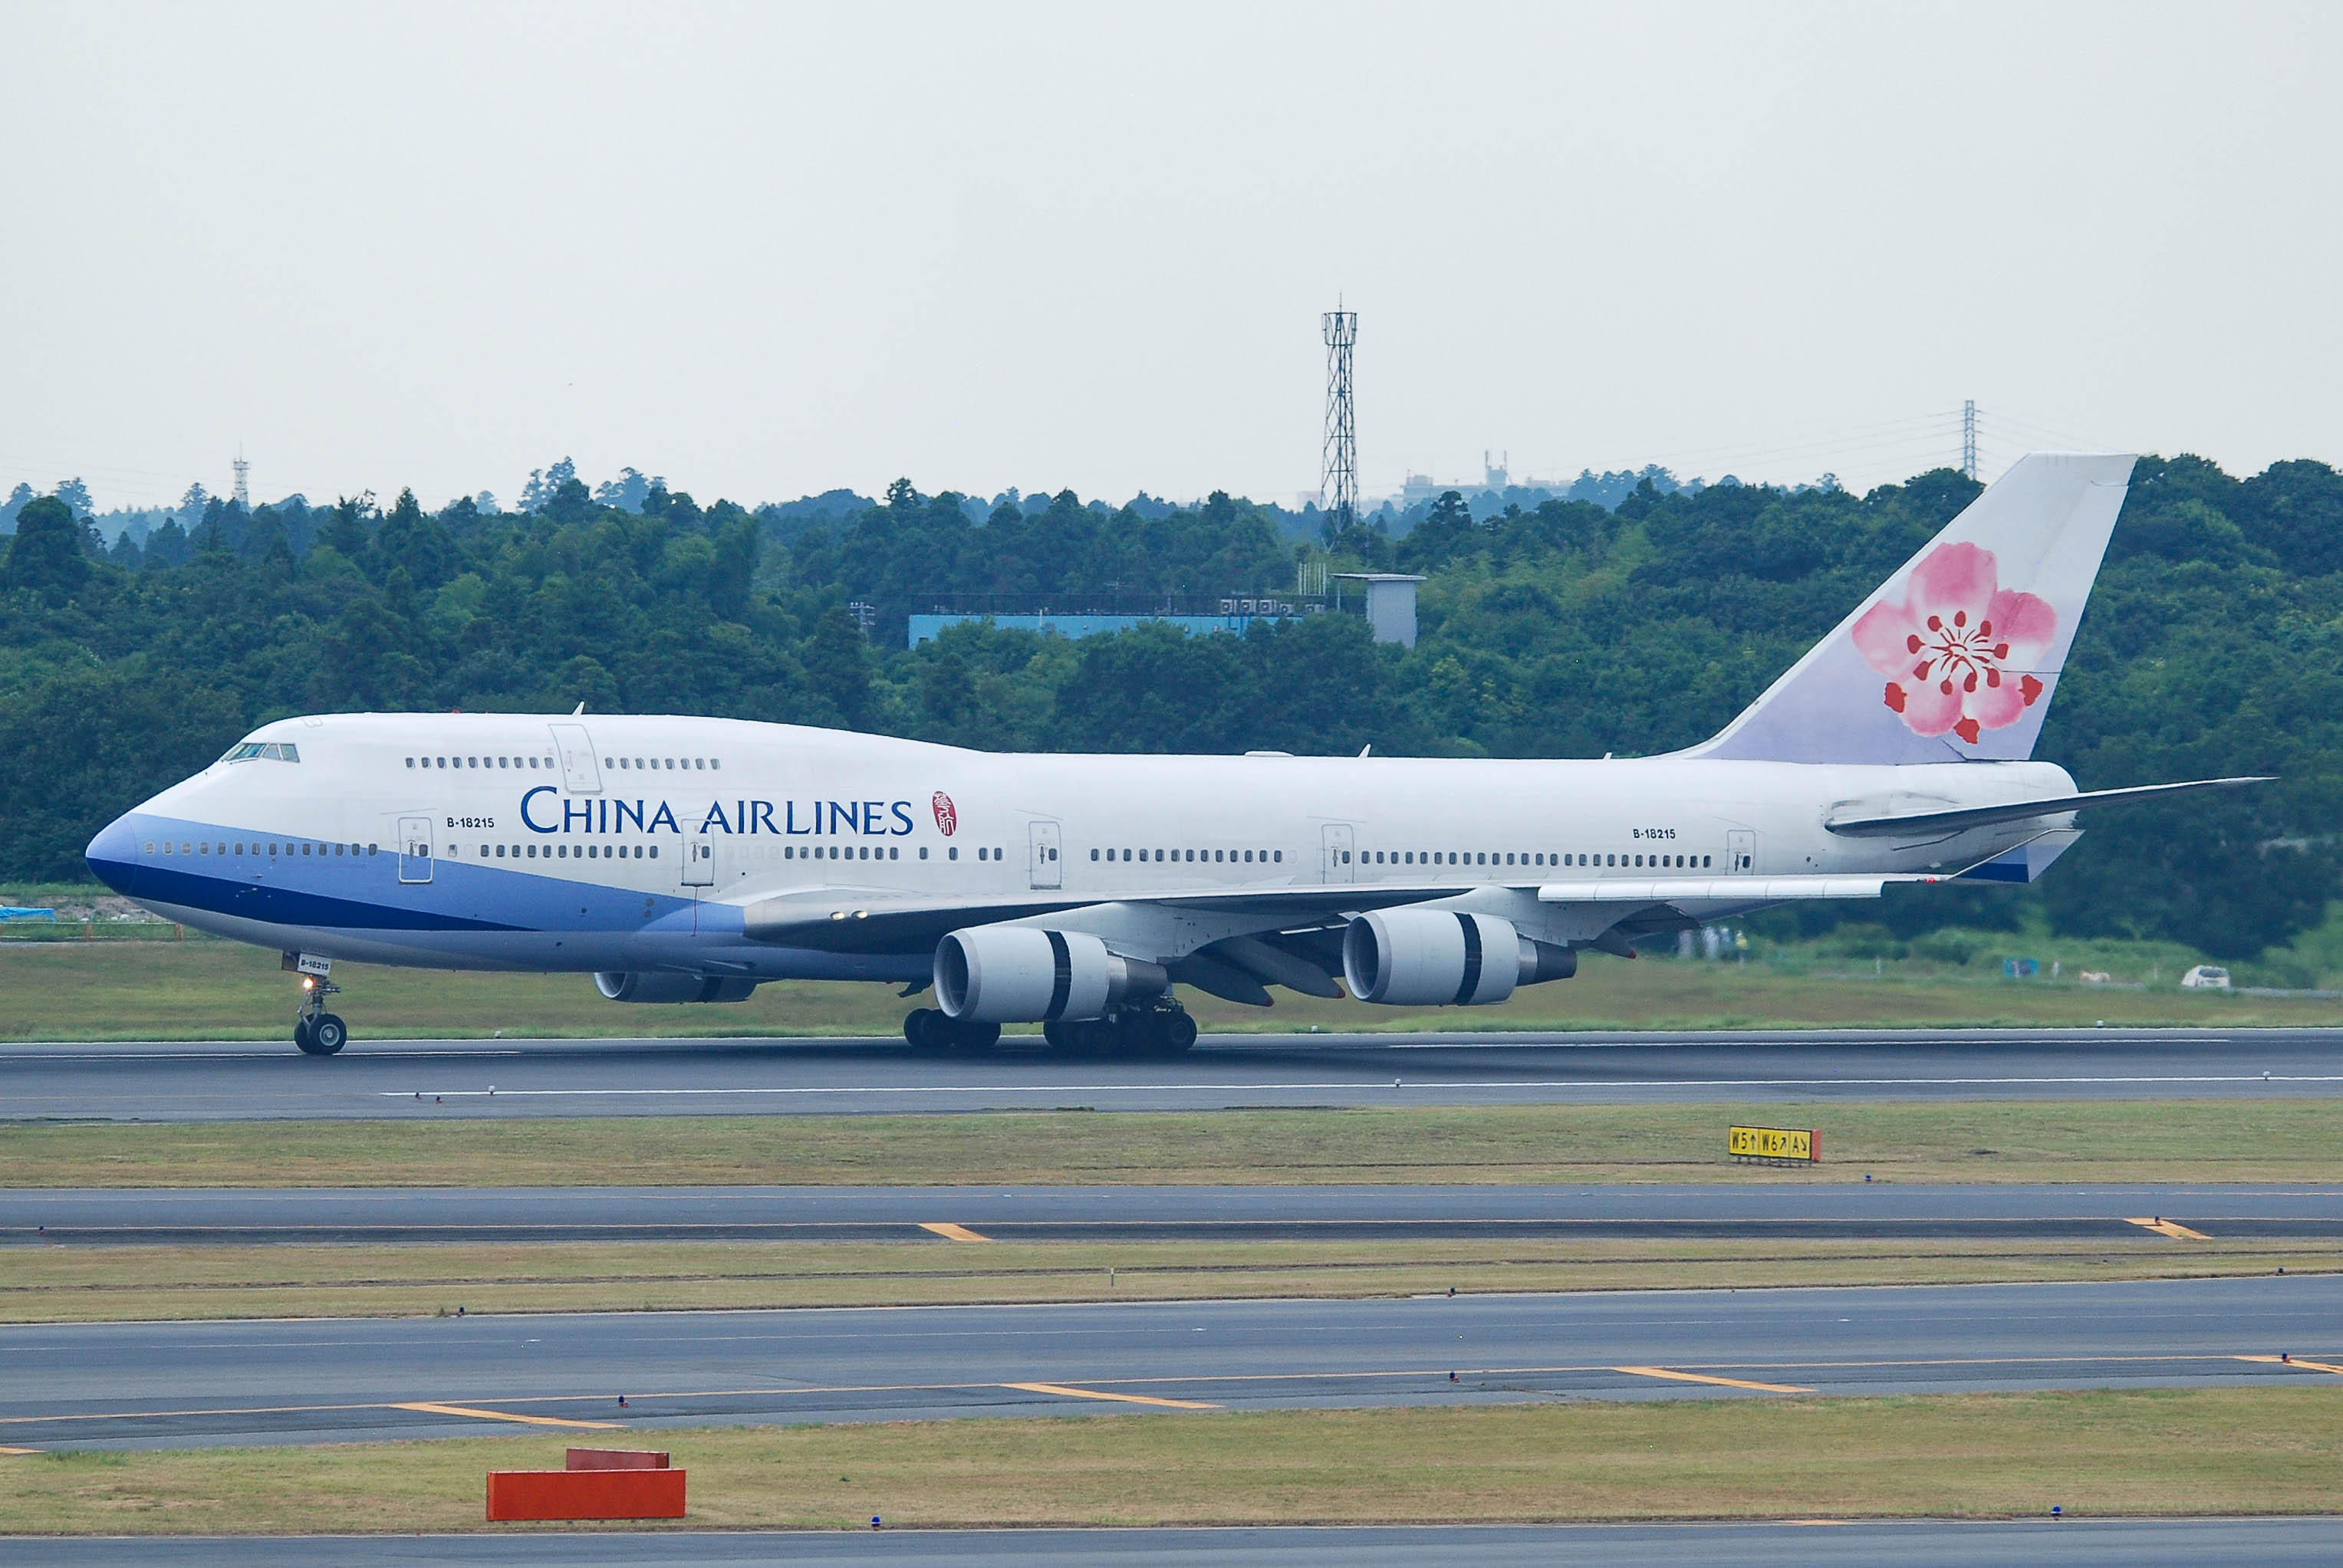 B-18215/B18215 China Airlines Boeing 747 Airframe Information - AVSpotters.com